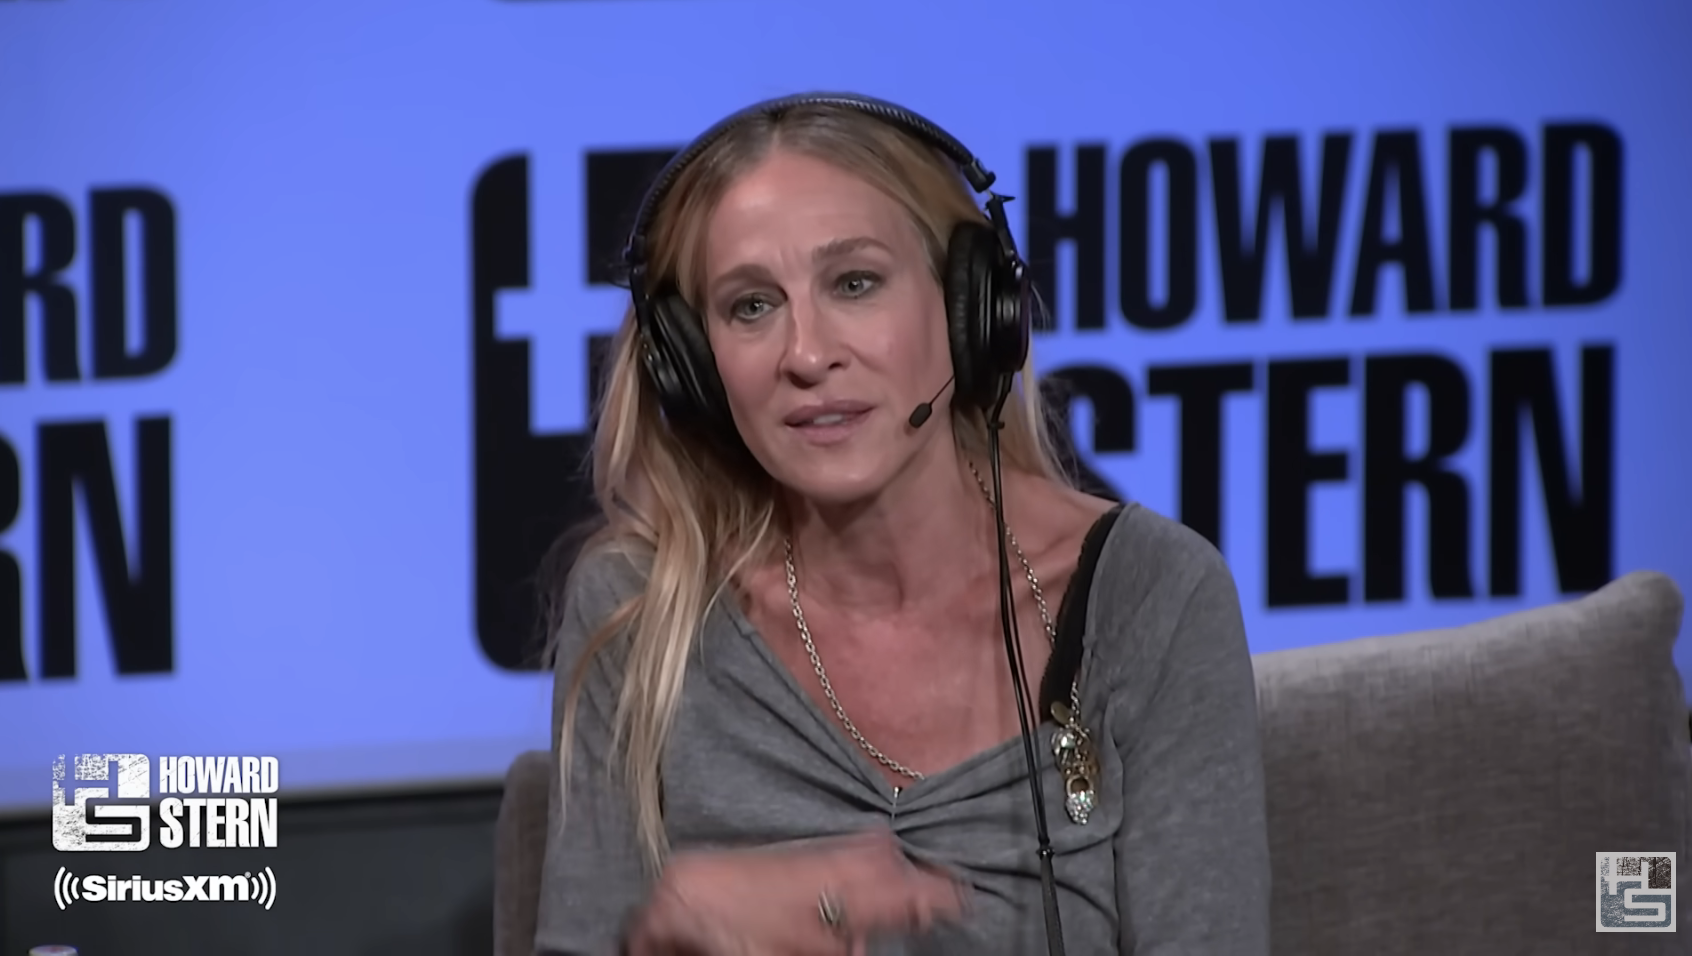 Close-up of SJP on the Howard Stern set, wearing headphones